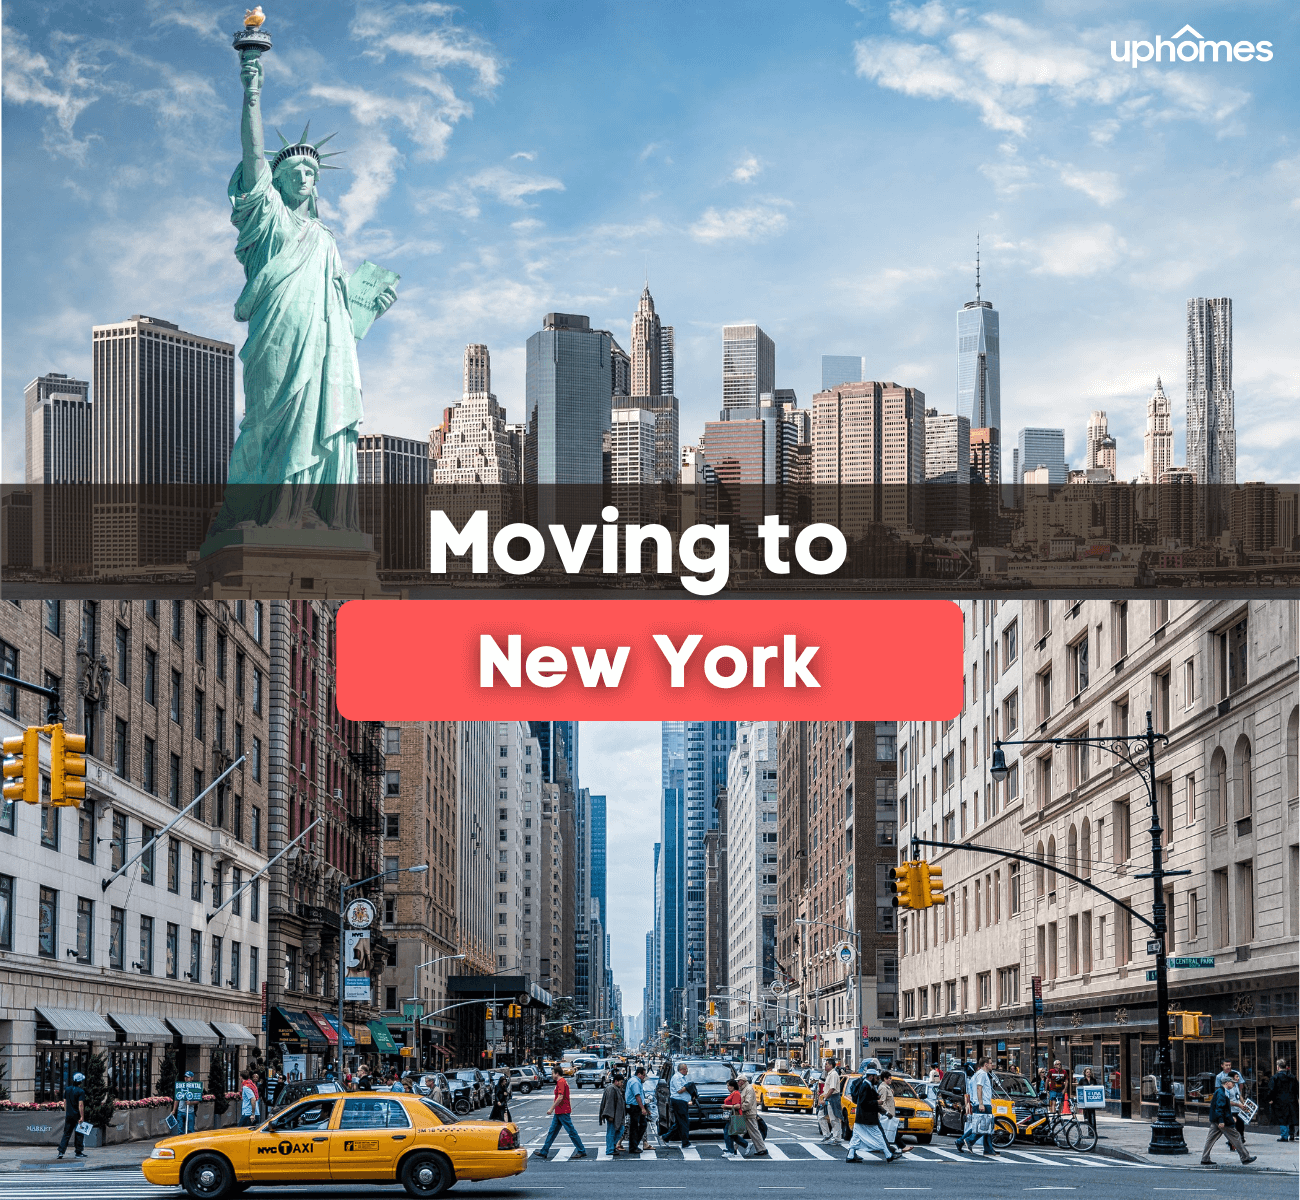 Moving to New York - What is it like living in the state of New York?